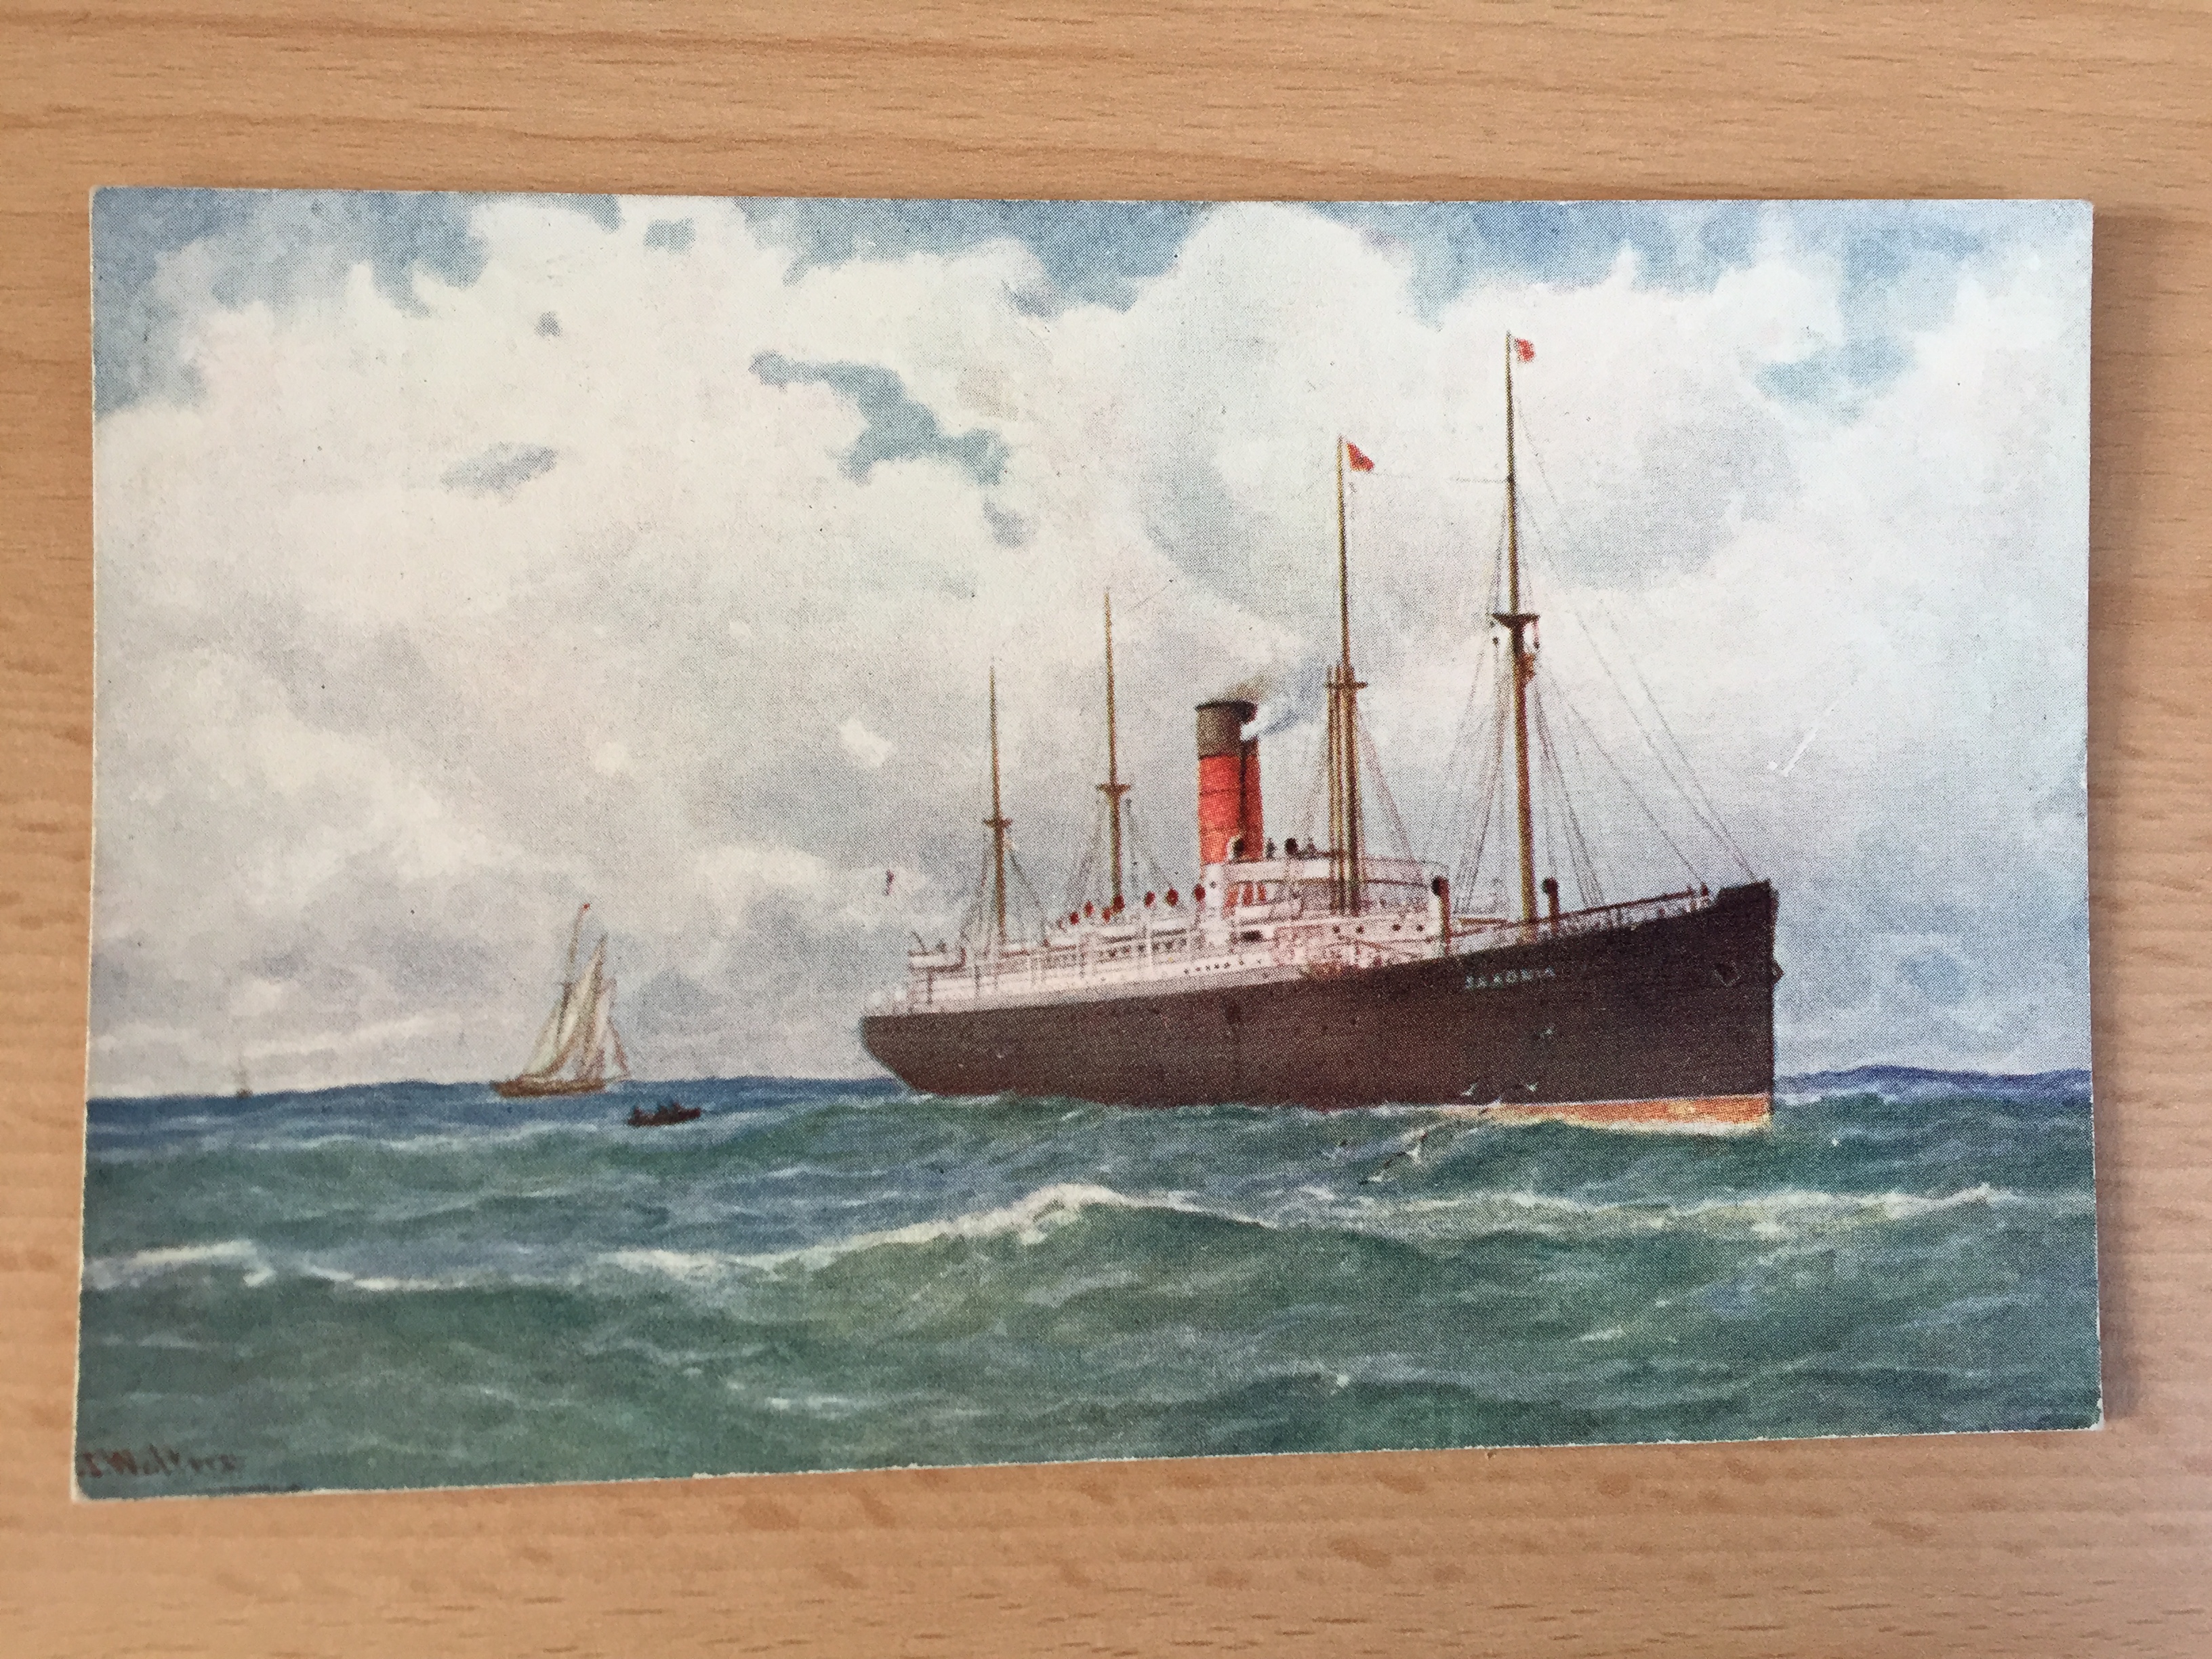 EARLY UNUSED COLOUR POSTCARD OF THE CUNARD LINE VESSEL THE SAXONIA